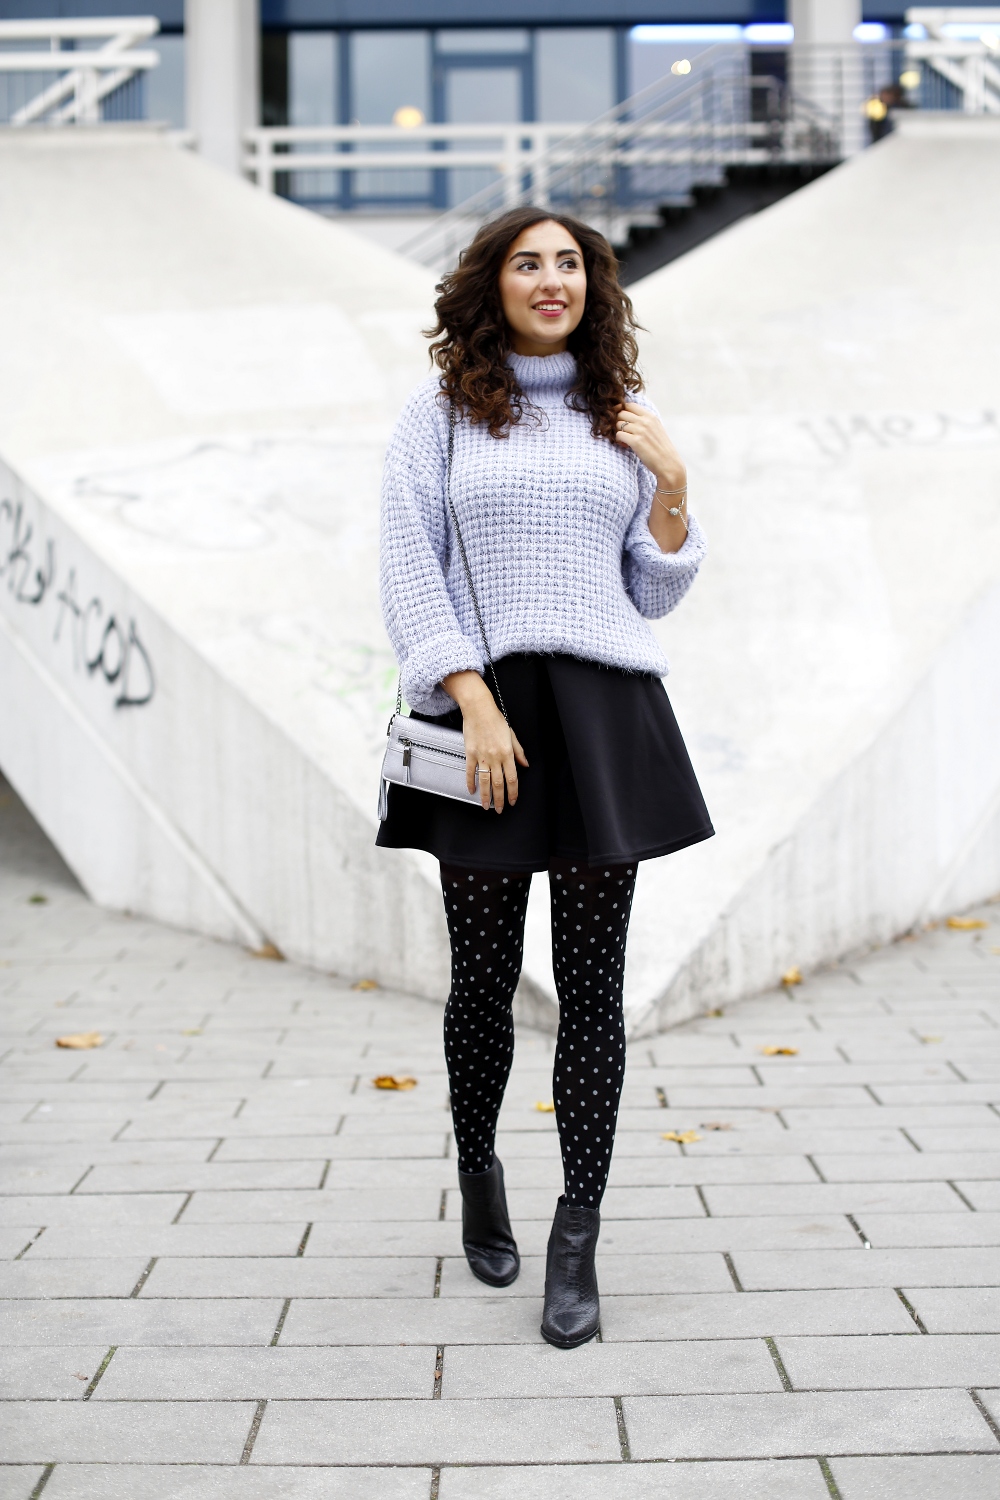 Black Pointed Booties light blue tutleneck sweater skater skirt in winter girly skirt in winter dotted tights pantihoses pointed booties silver detials accessoiry ice blue baby blue bershka sweater modeblog berlin streetstyle preppy look